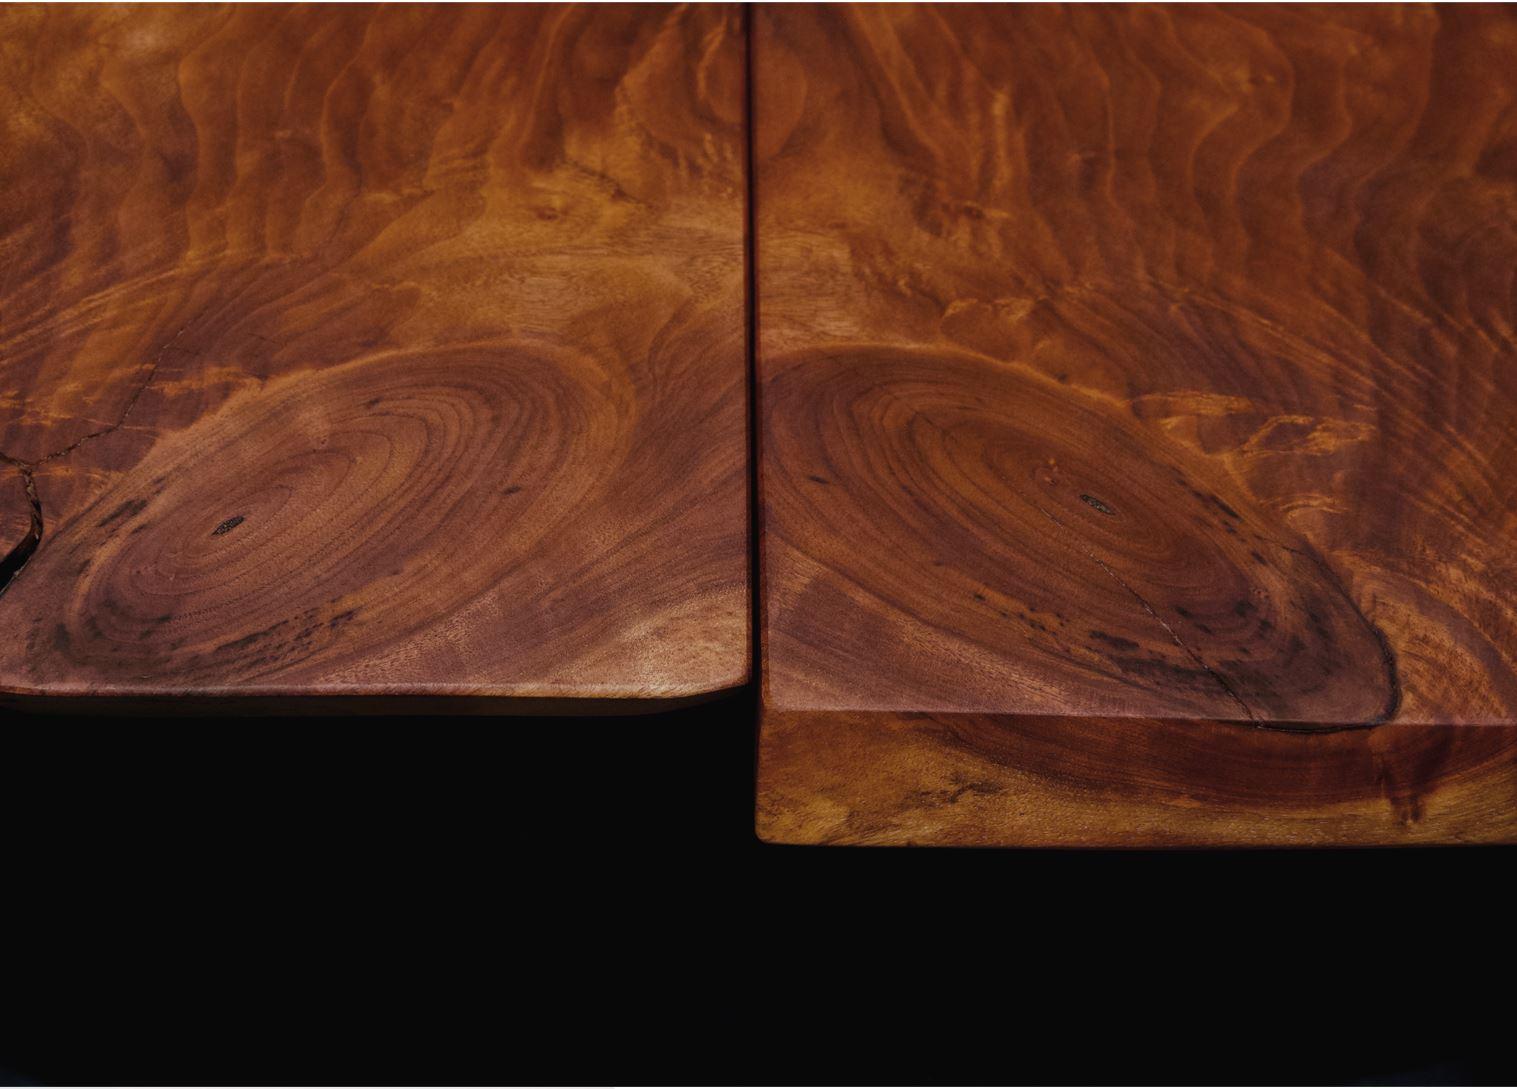 This delightful pair of Live Edge Black Walnut End Tables is available immediately. Each has a Live Edge Black Walnut Slab top and a solid Black Walnut cantilevered base. The Slabs are Book Matches; they can be placed end-to-end at the wide ends and